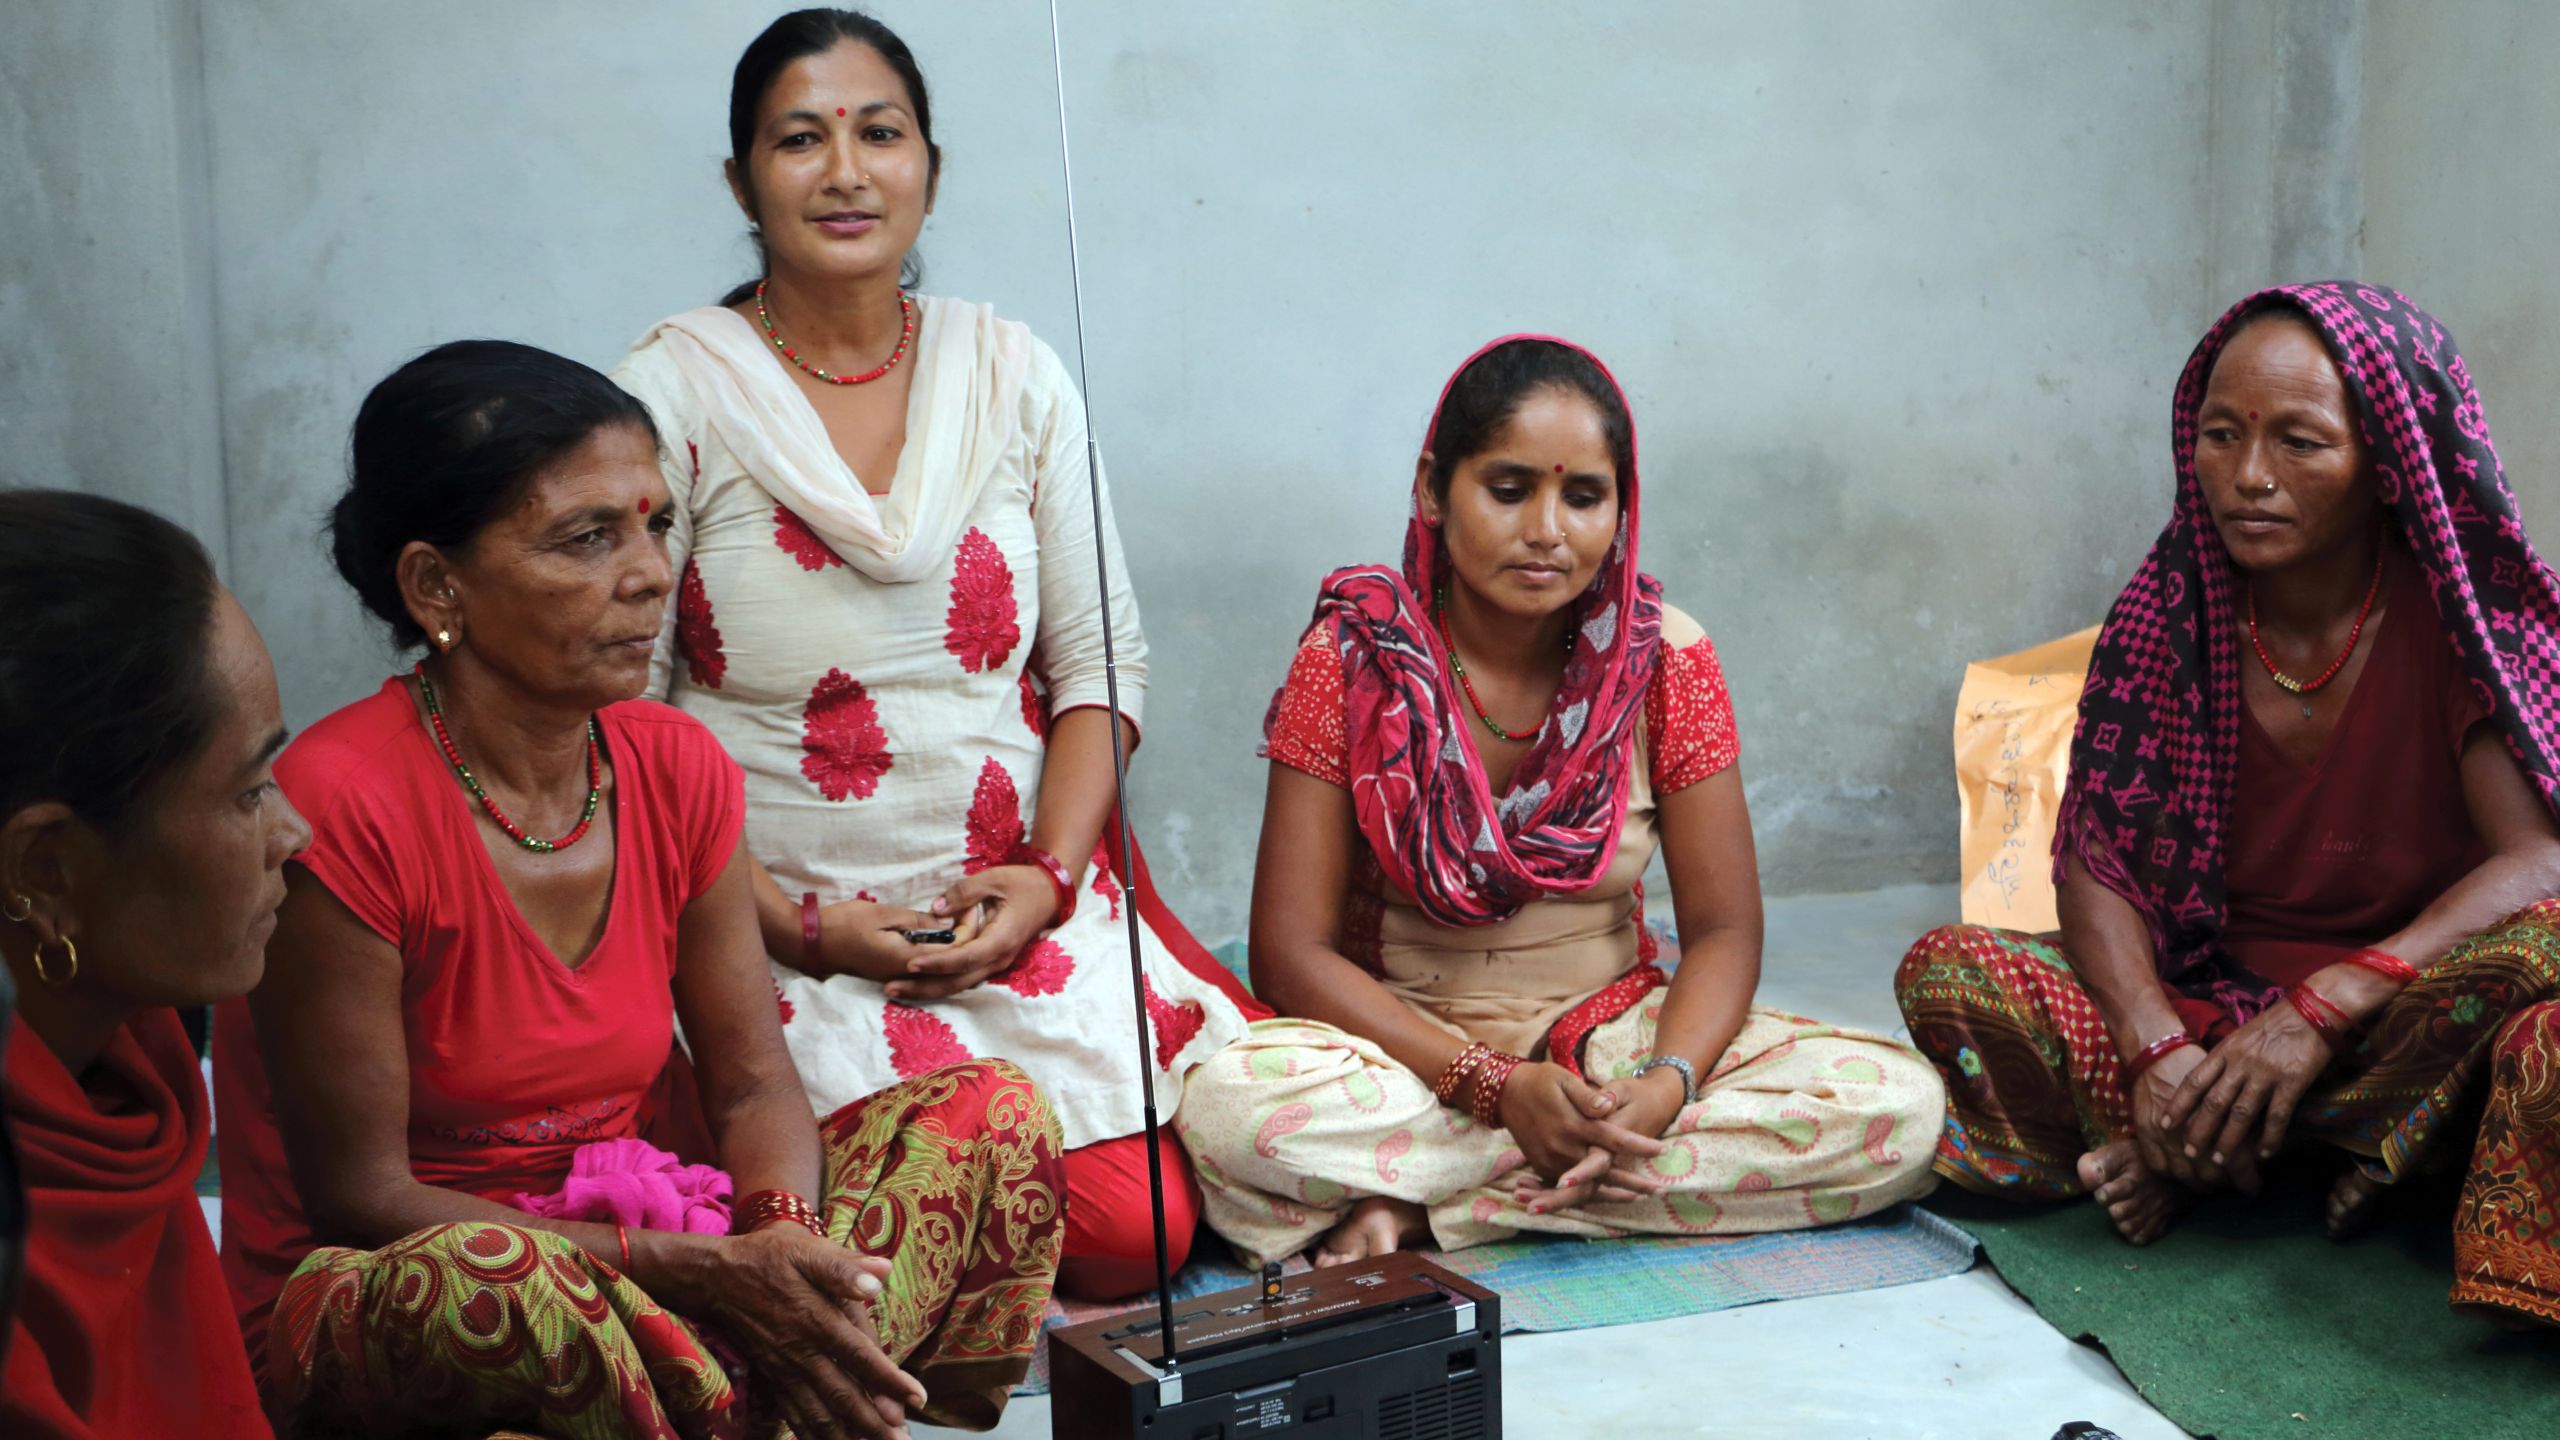 A radio drama is  part of an intervention to curb intimate partner violence  in Nepal. Cari Jo Clark , who is not pictured here, is working with Equal Access International to roll out the next phase.